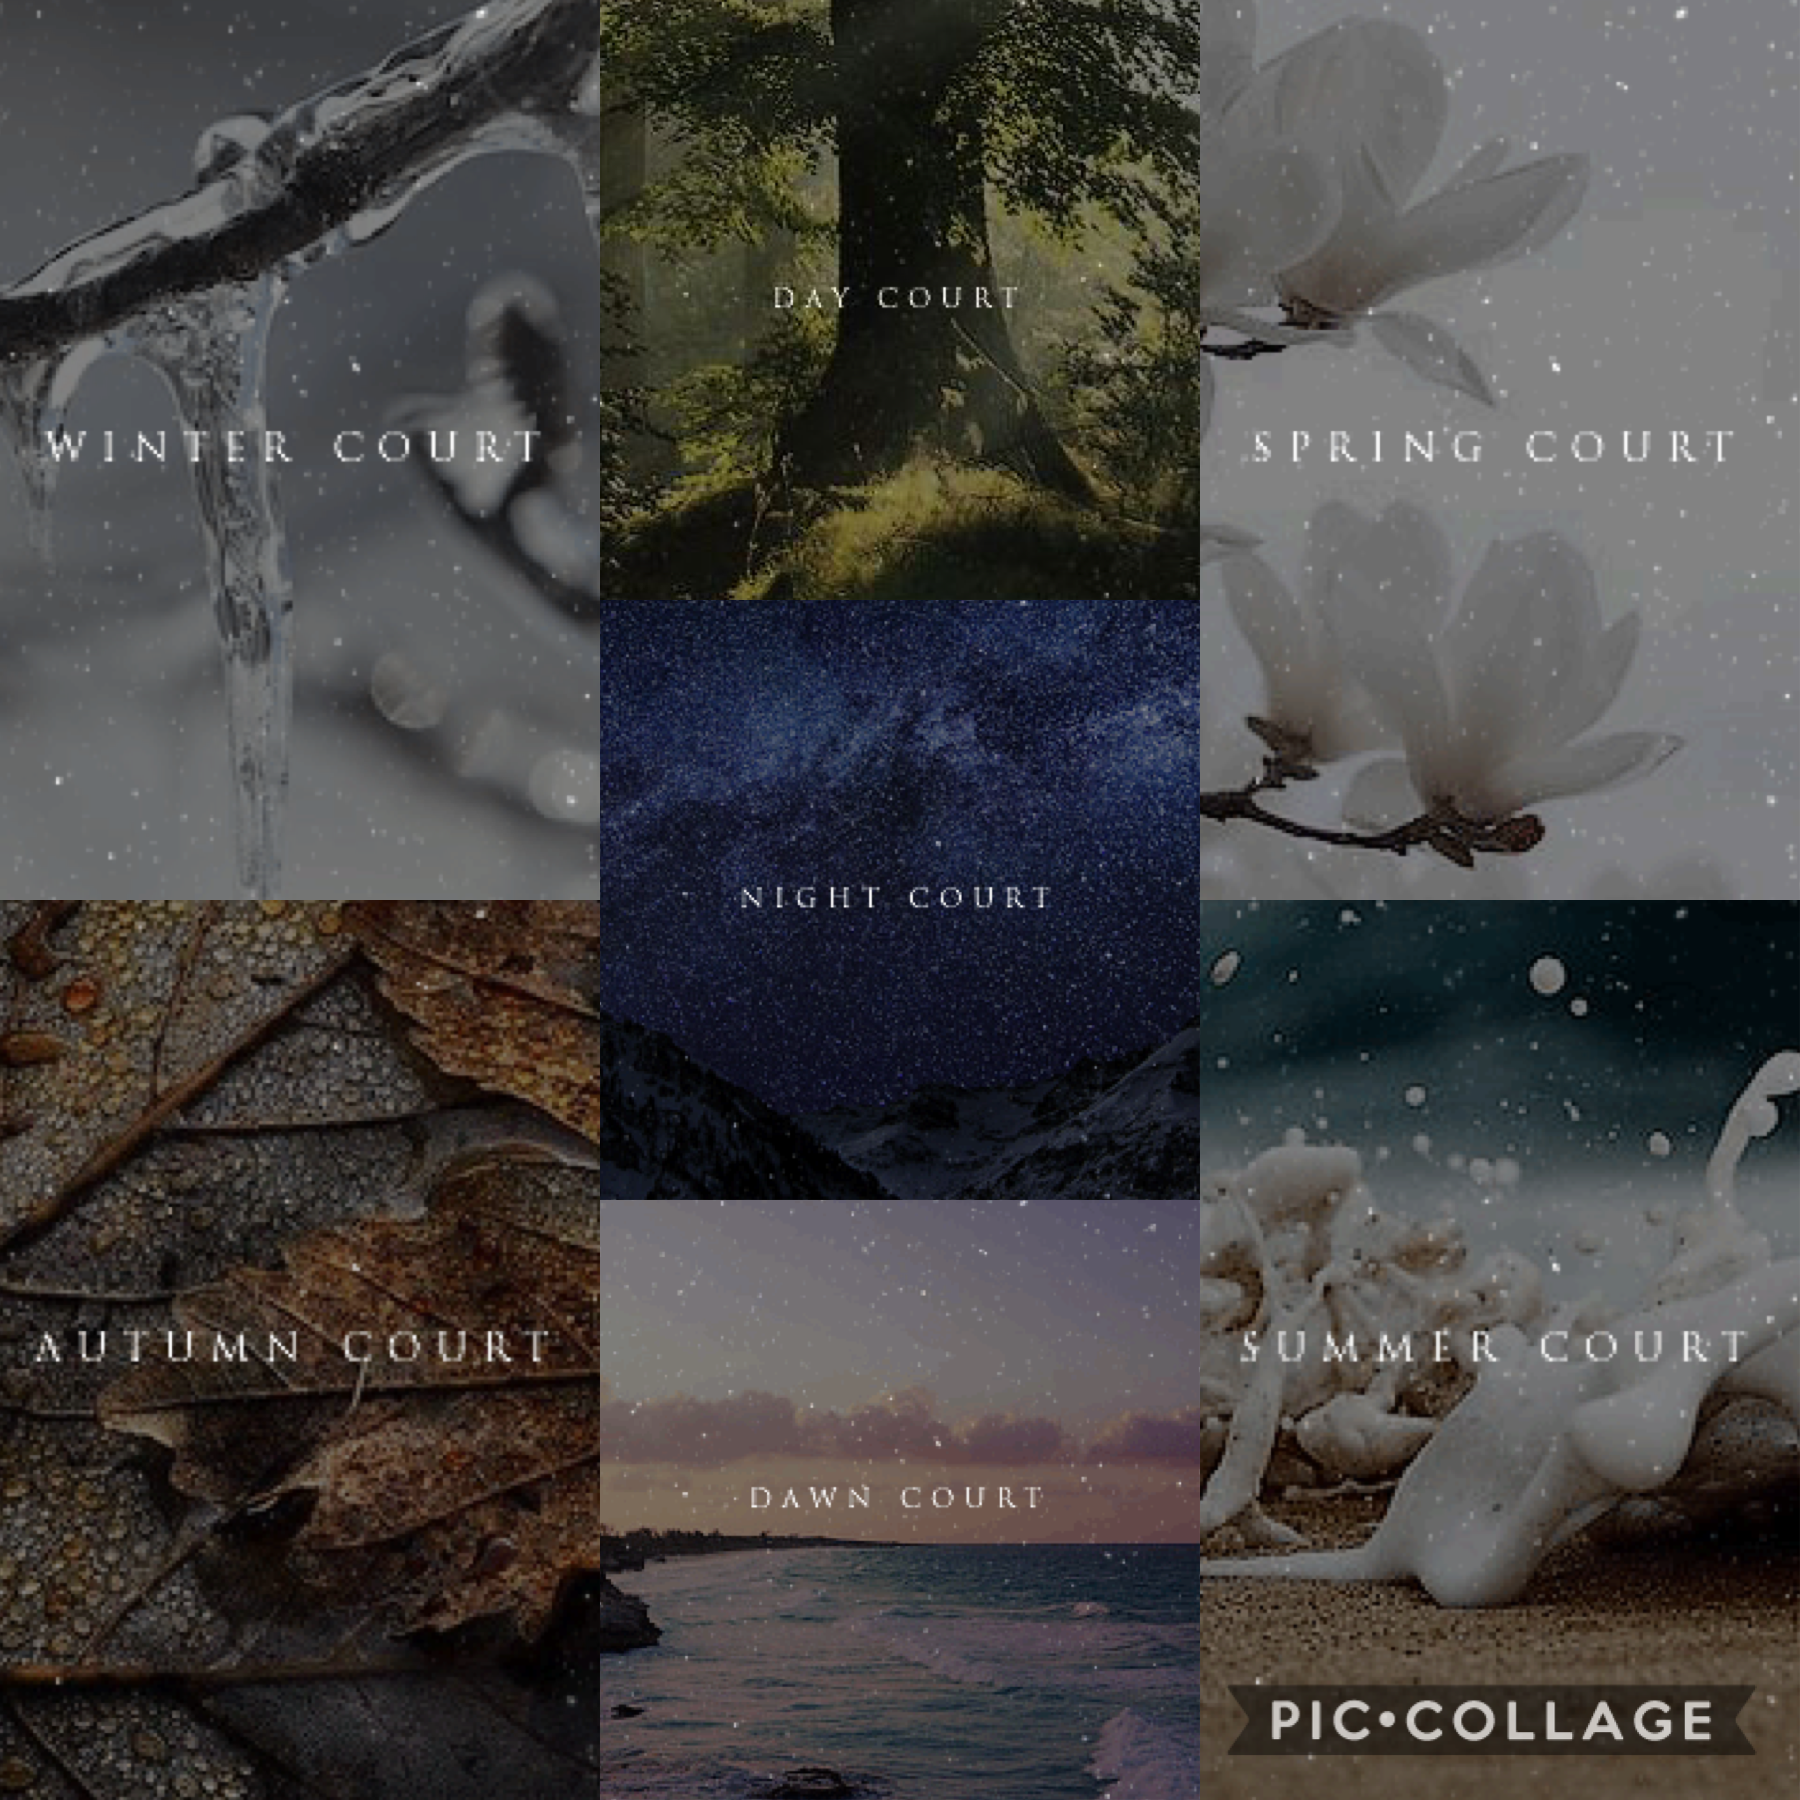 The acotar courts which one is yours? Mines either dawn or night